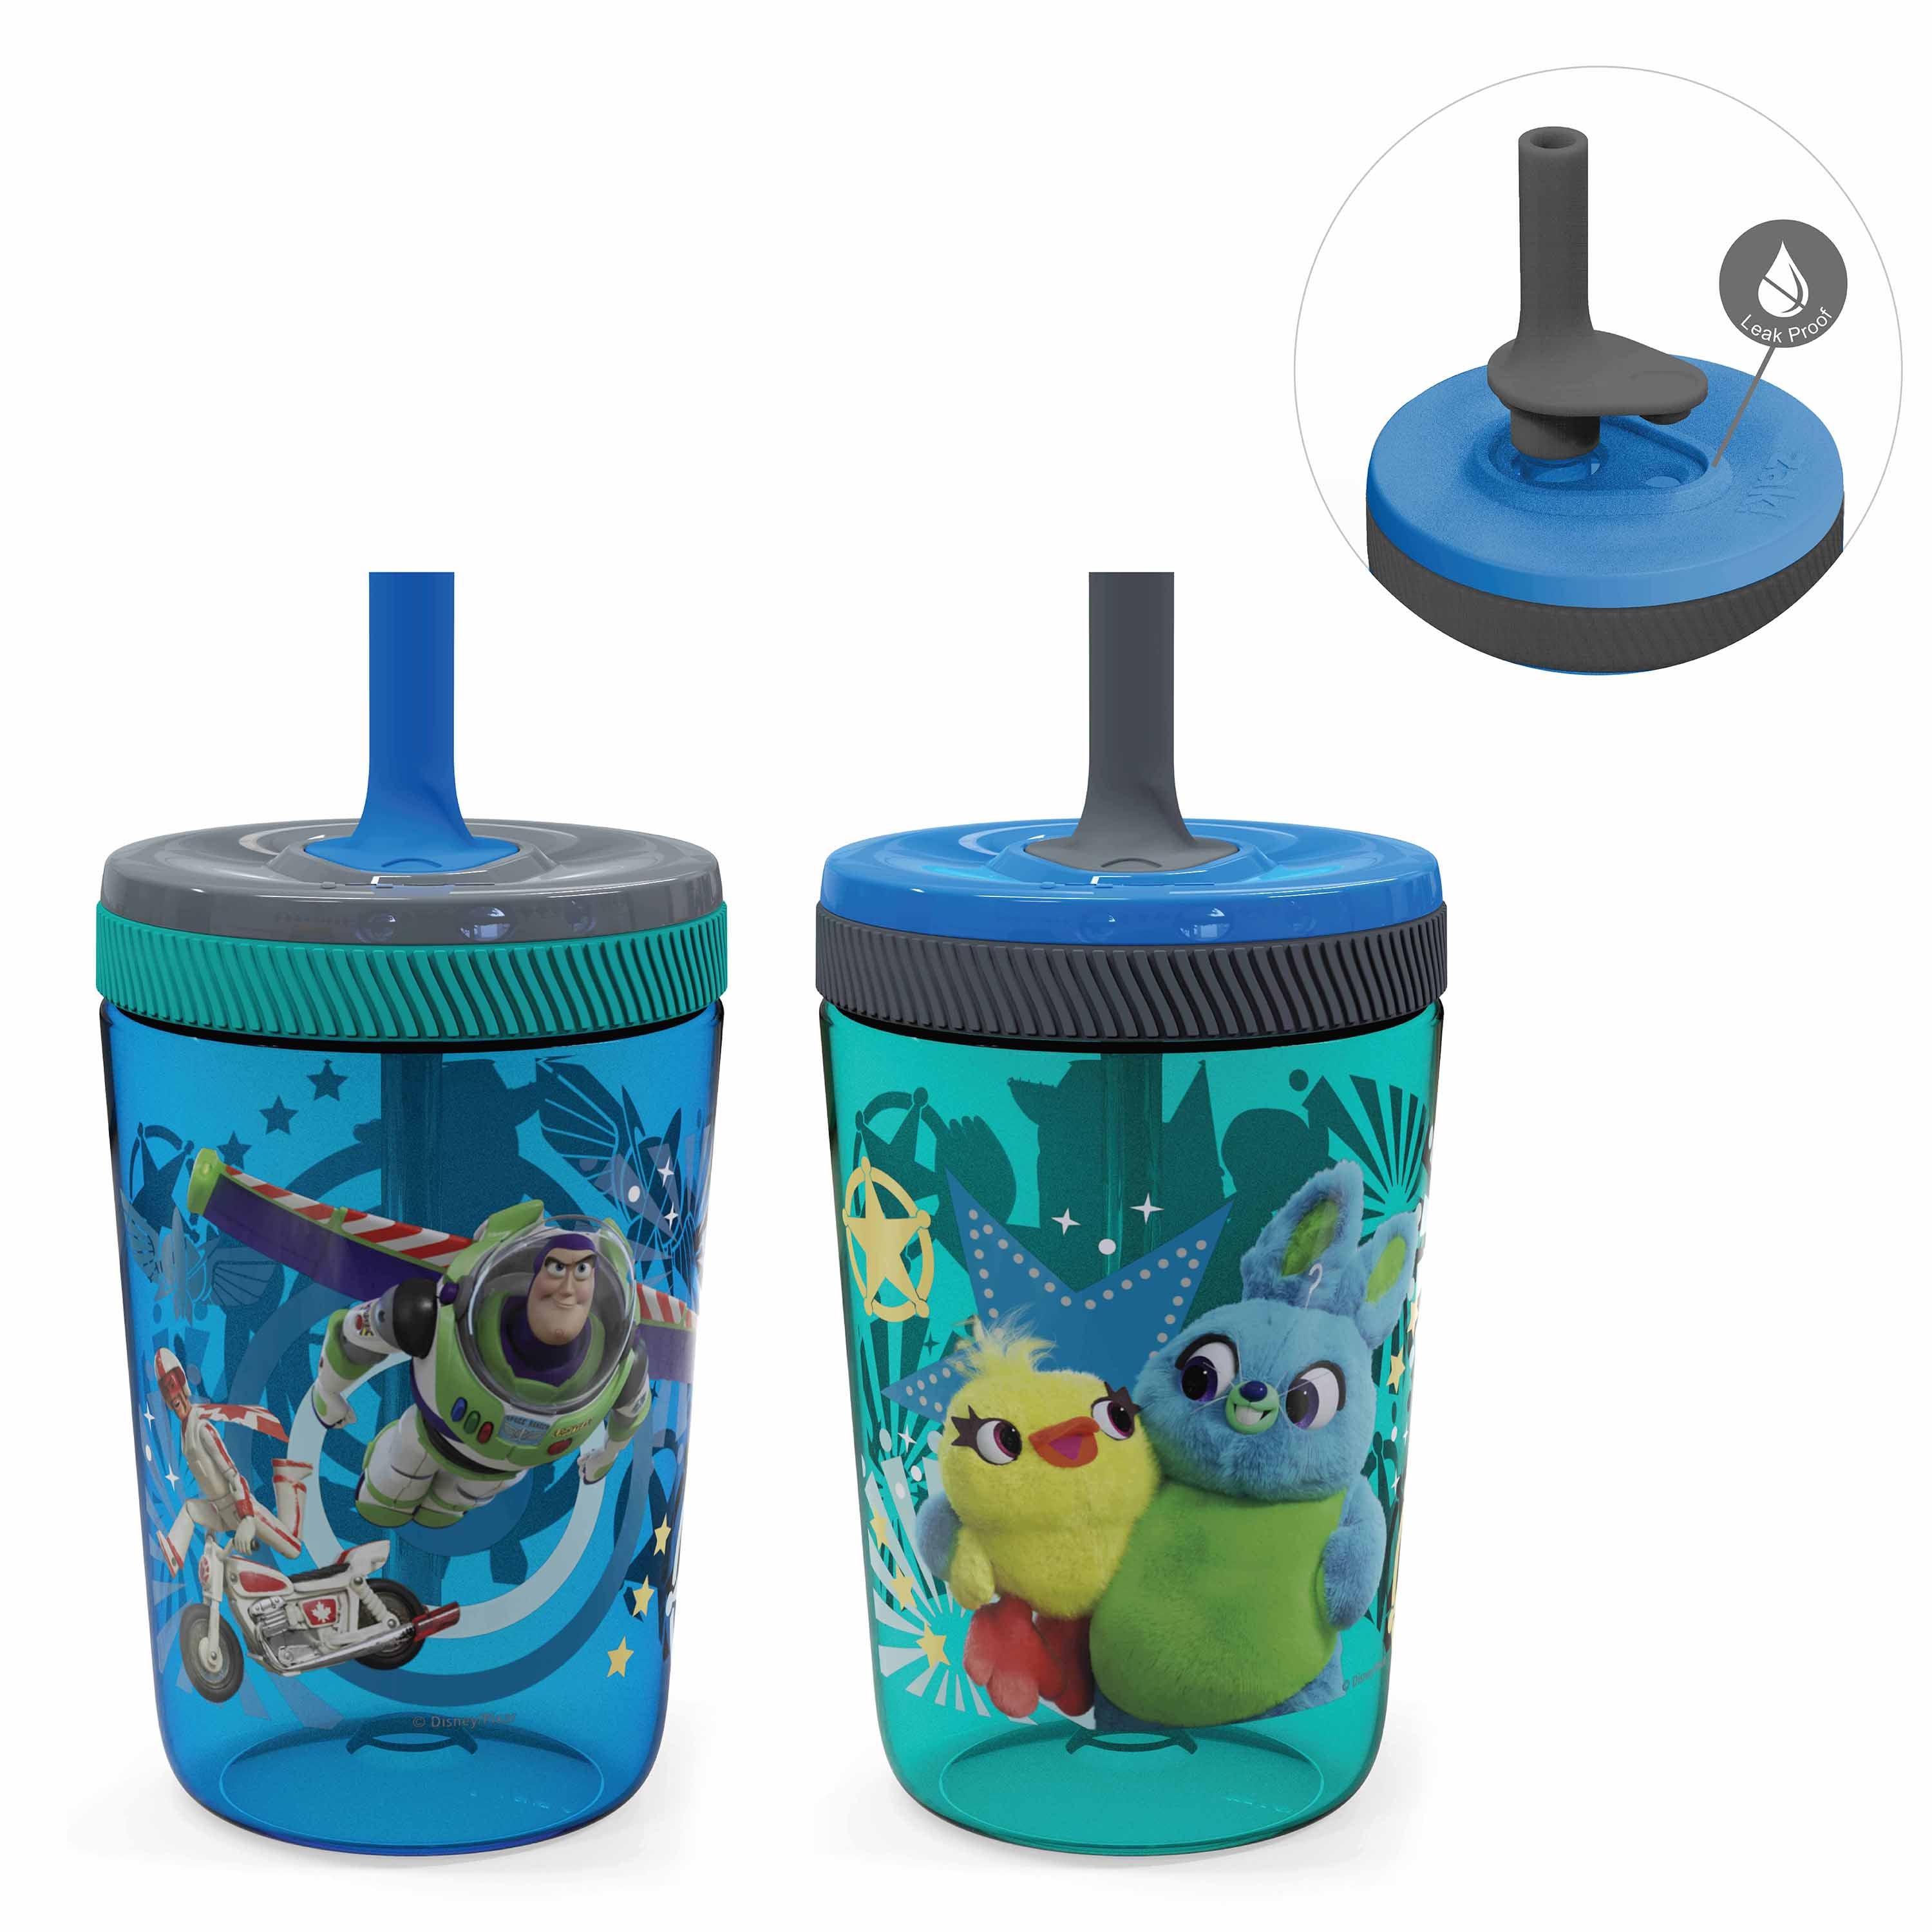 Zak Designs Disney and Pixar 15 Ounce Plastic Tumbler with Lid and Straw, Buzz Lightyear and Friends, 2-Piece Set, Size: 15 fl oz